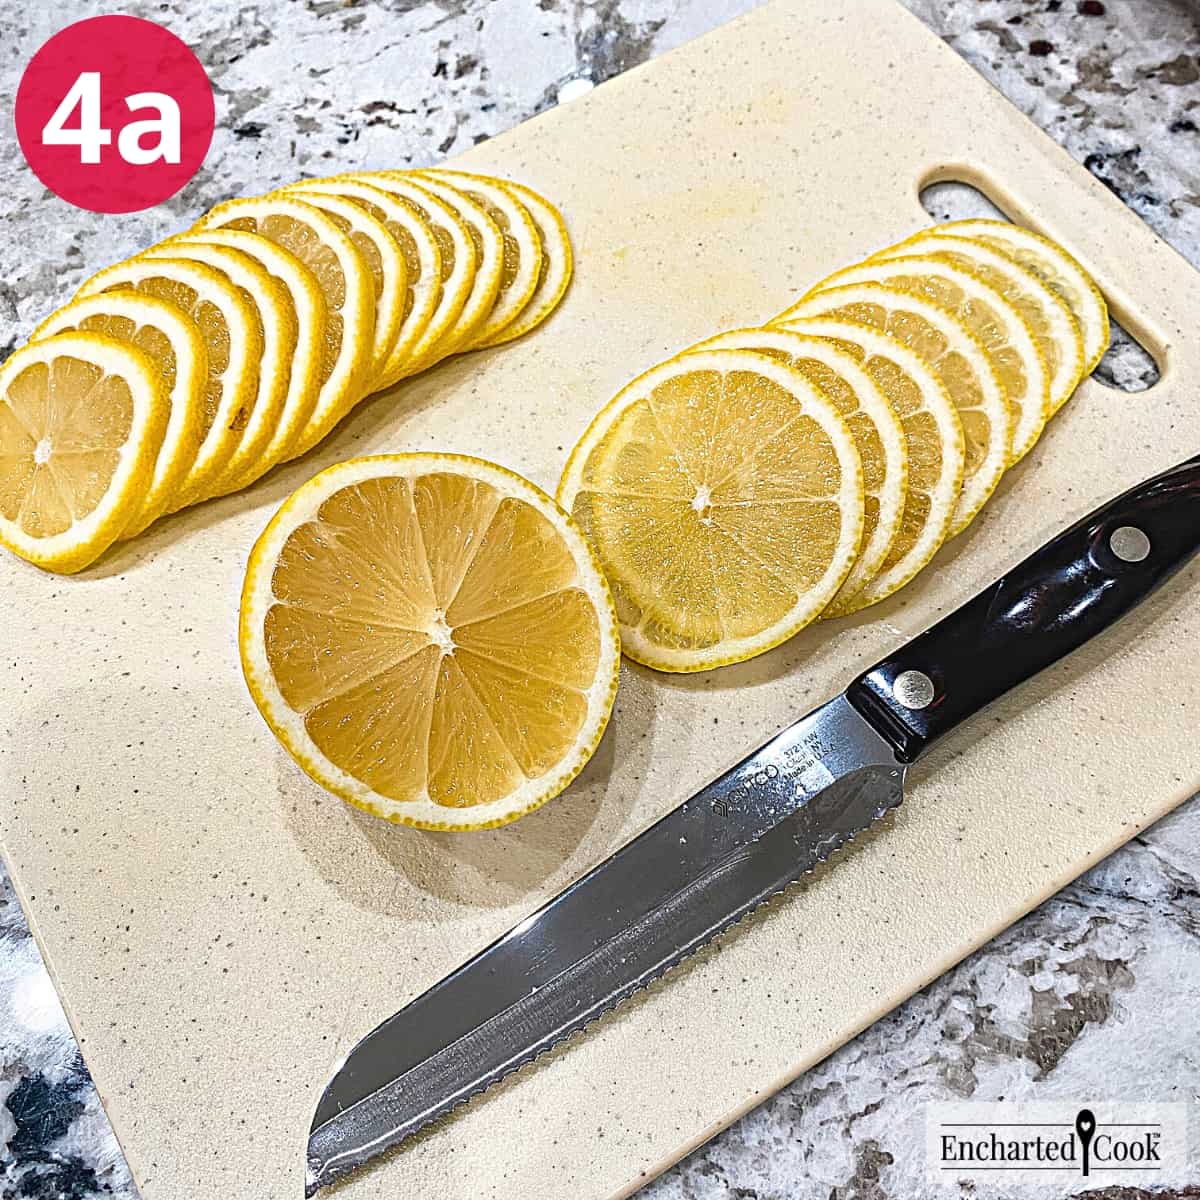 Process Photo 4a - Slicing the lemon thinly on a cutting board.